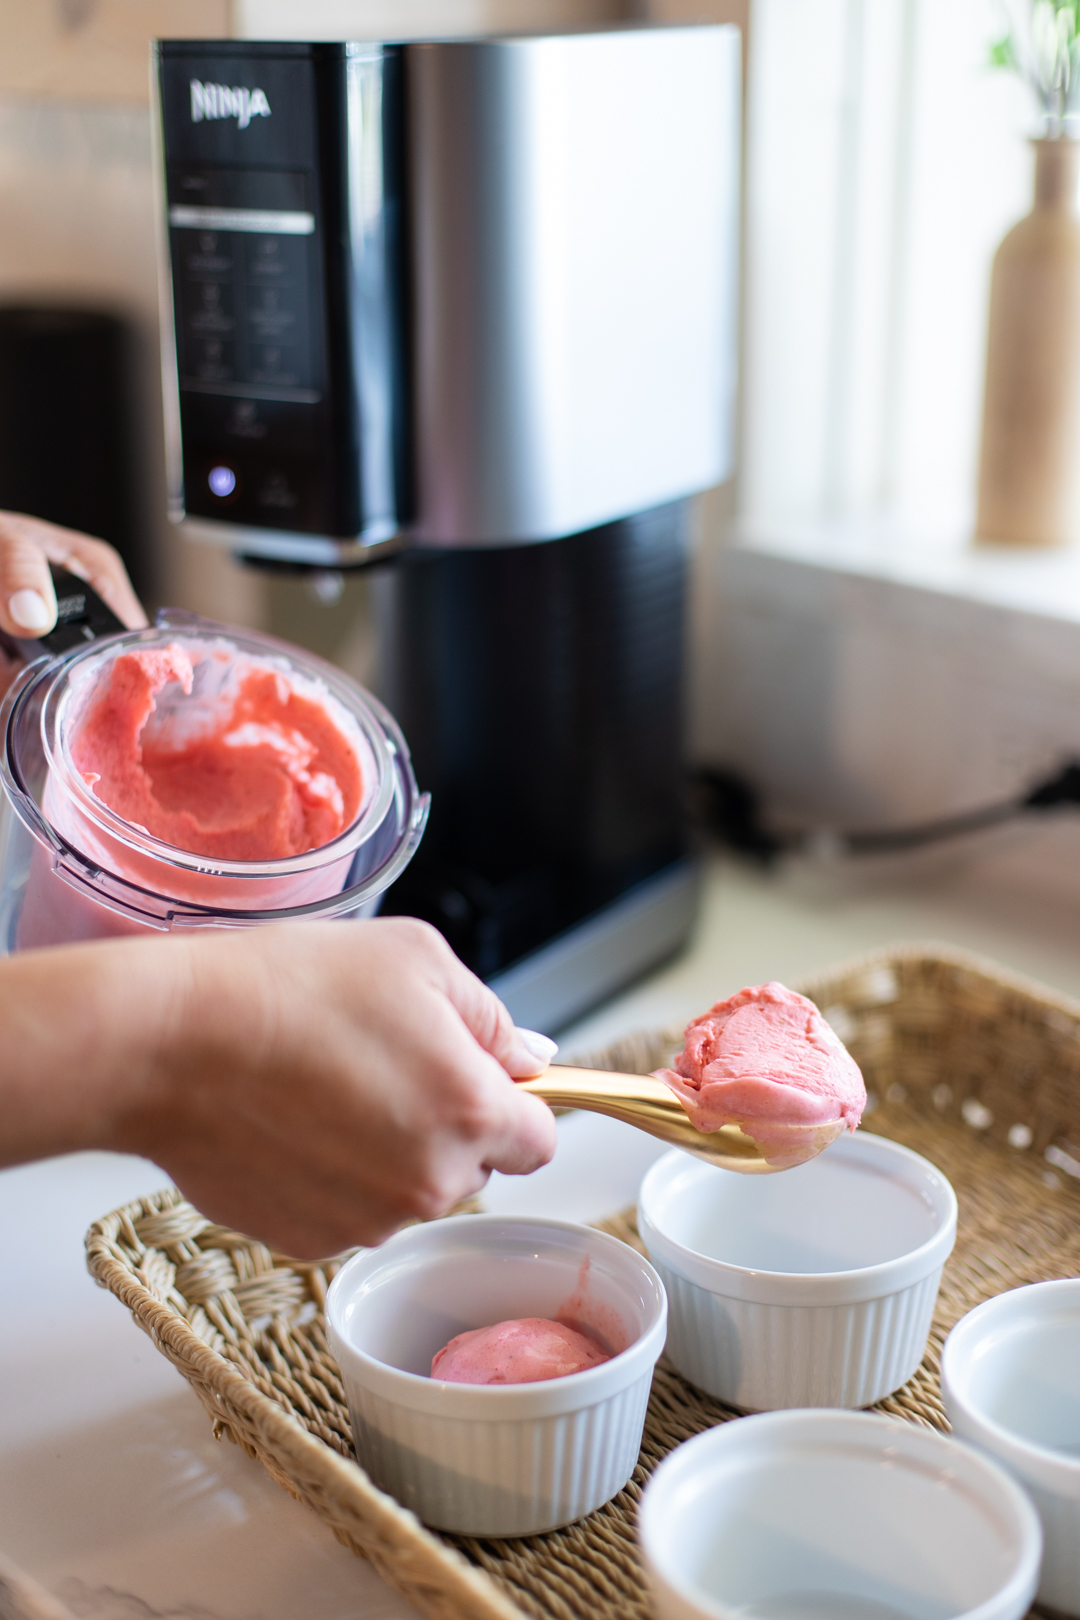 HOT* Ninja CREAMi 7-in-1 Frozen Treat Maker with Four Extra Pints